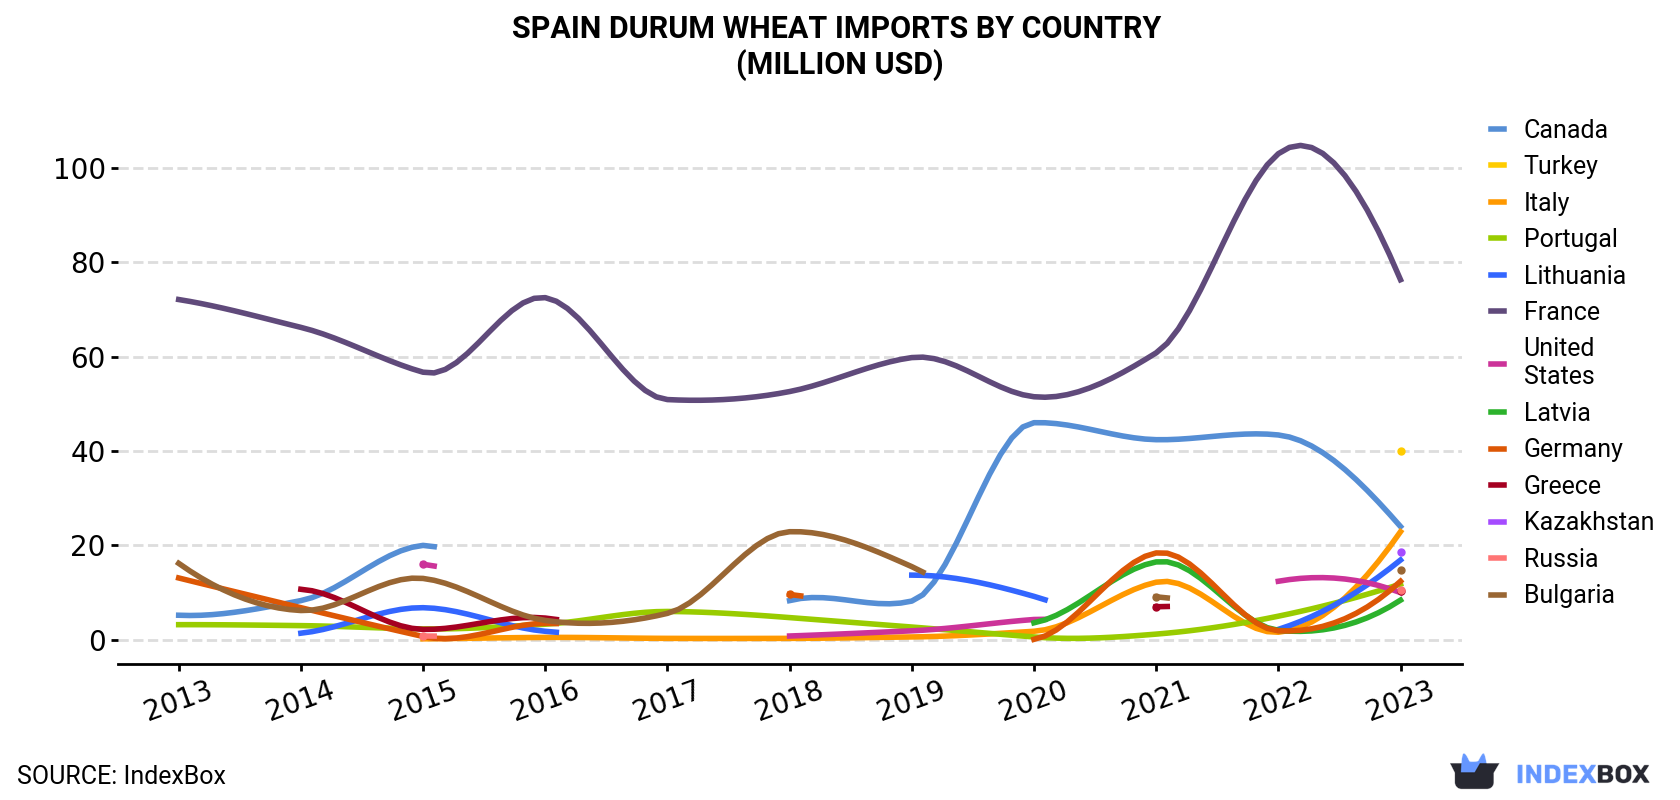 Spain Durum Wheat Imports By Country (Million USD)